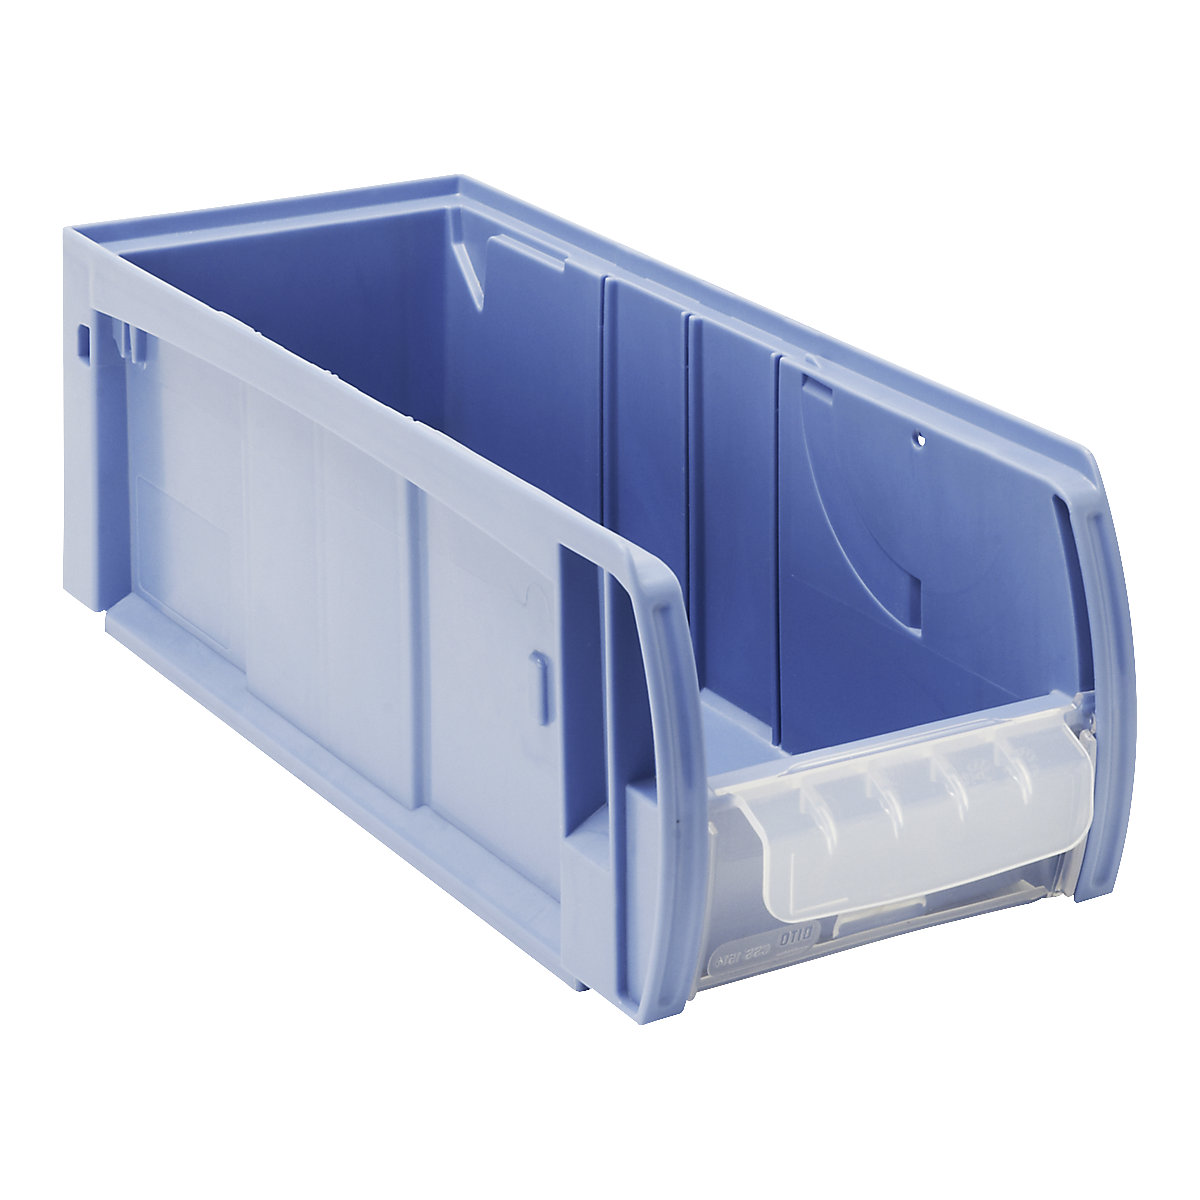 CTB C-parts container open fronted storage bin – BITO, made of PP, pack of 12, LxWxH 400 x 156 x 140 mm-1